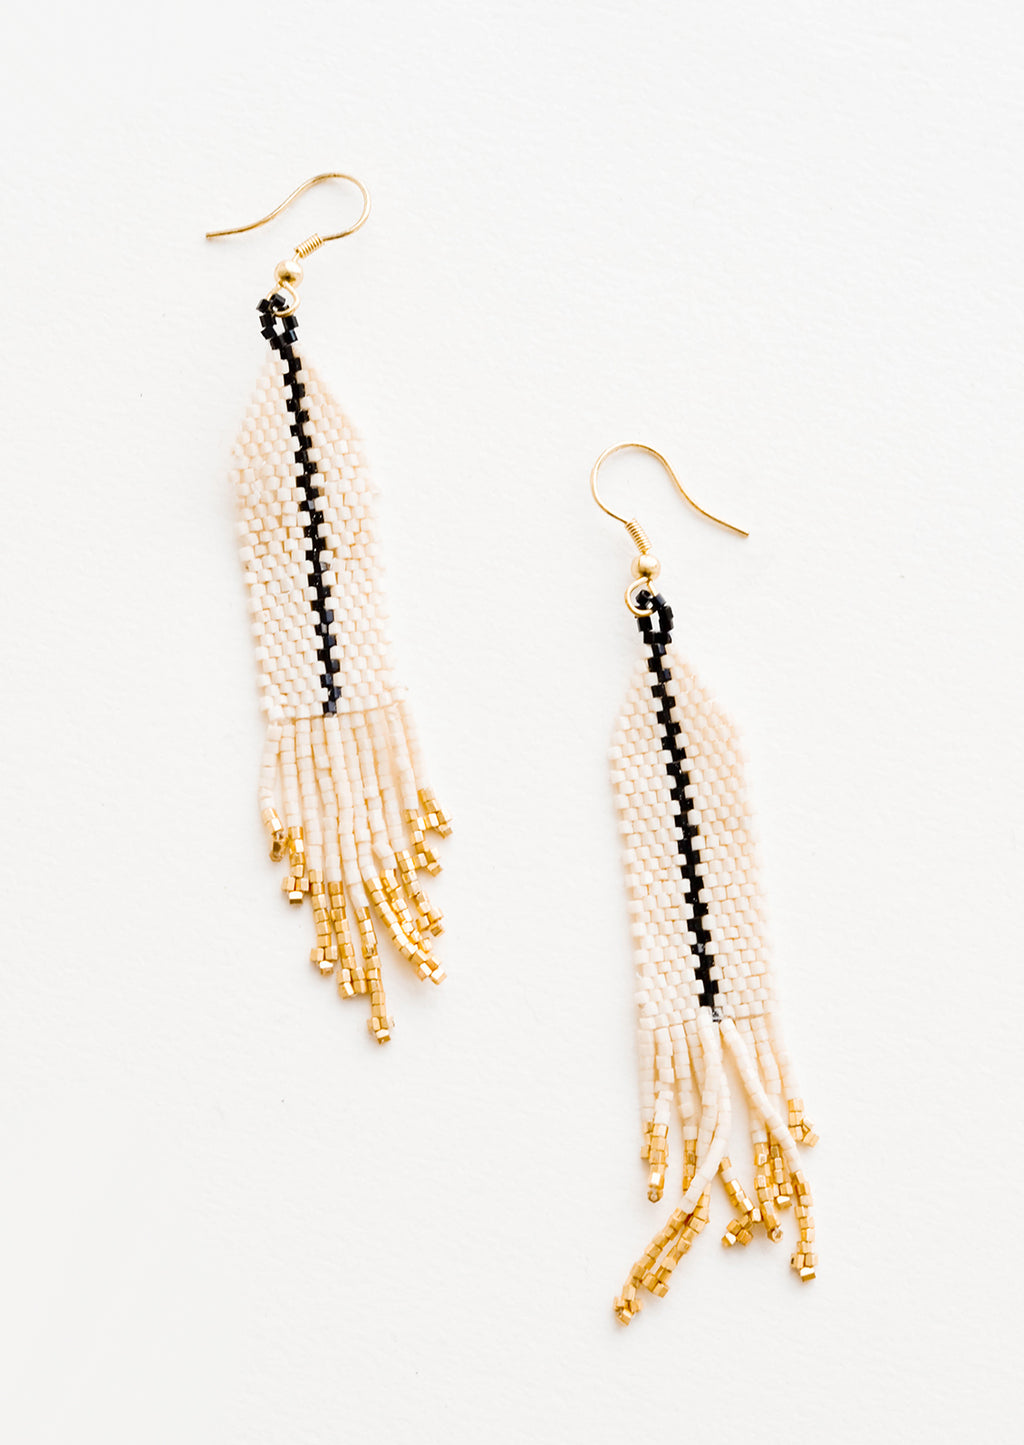 Ivory: Dangling beaded earrings with white beads accented with black bead stripe and gold bead fringe.